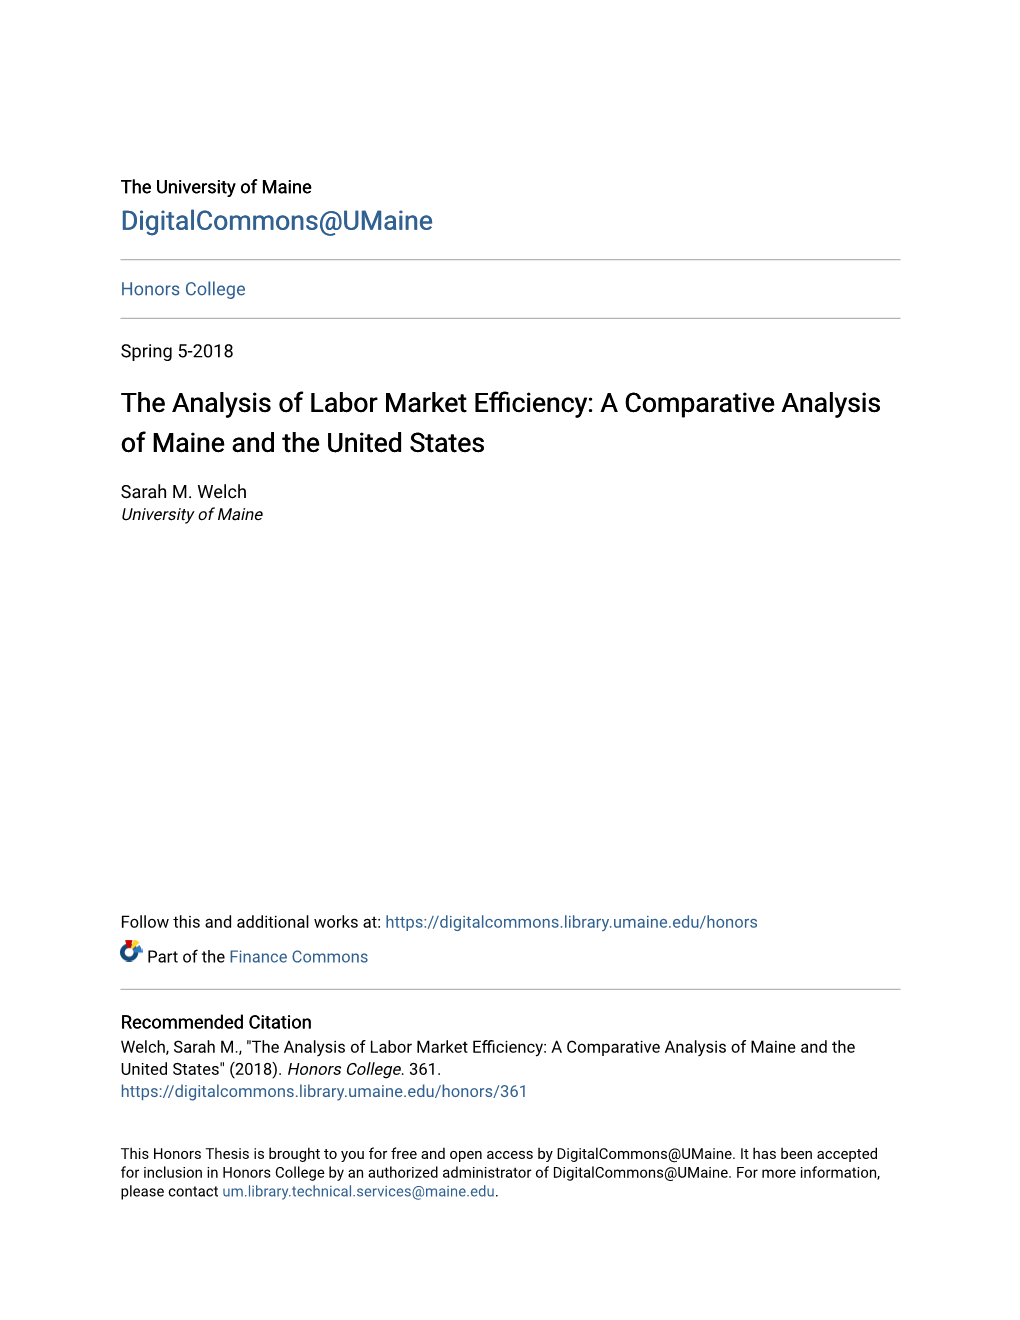 The Analysis of Labor Market Efficiency: a Comparative Analysis of Maine and the United States